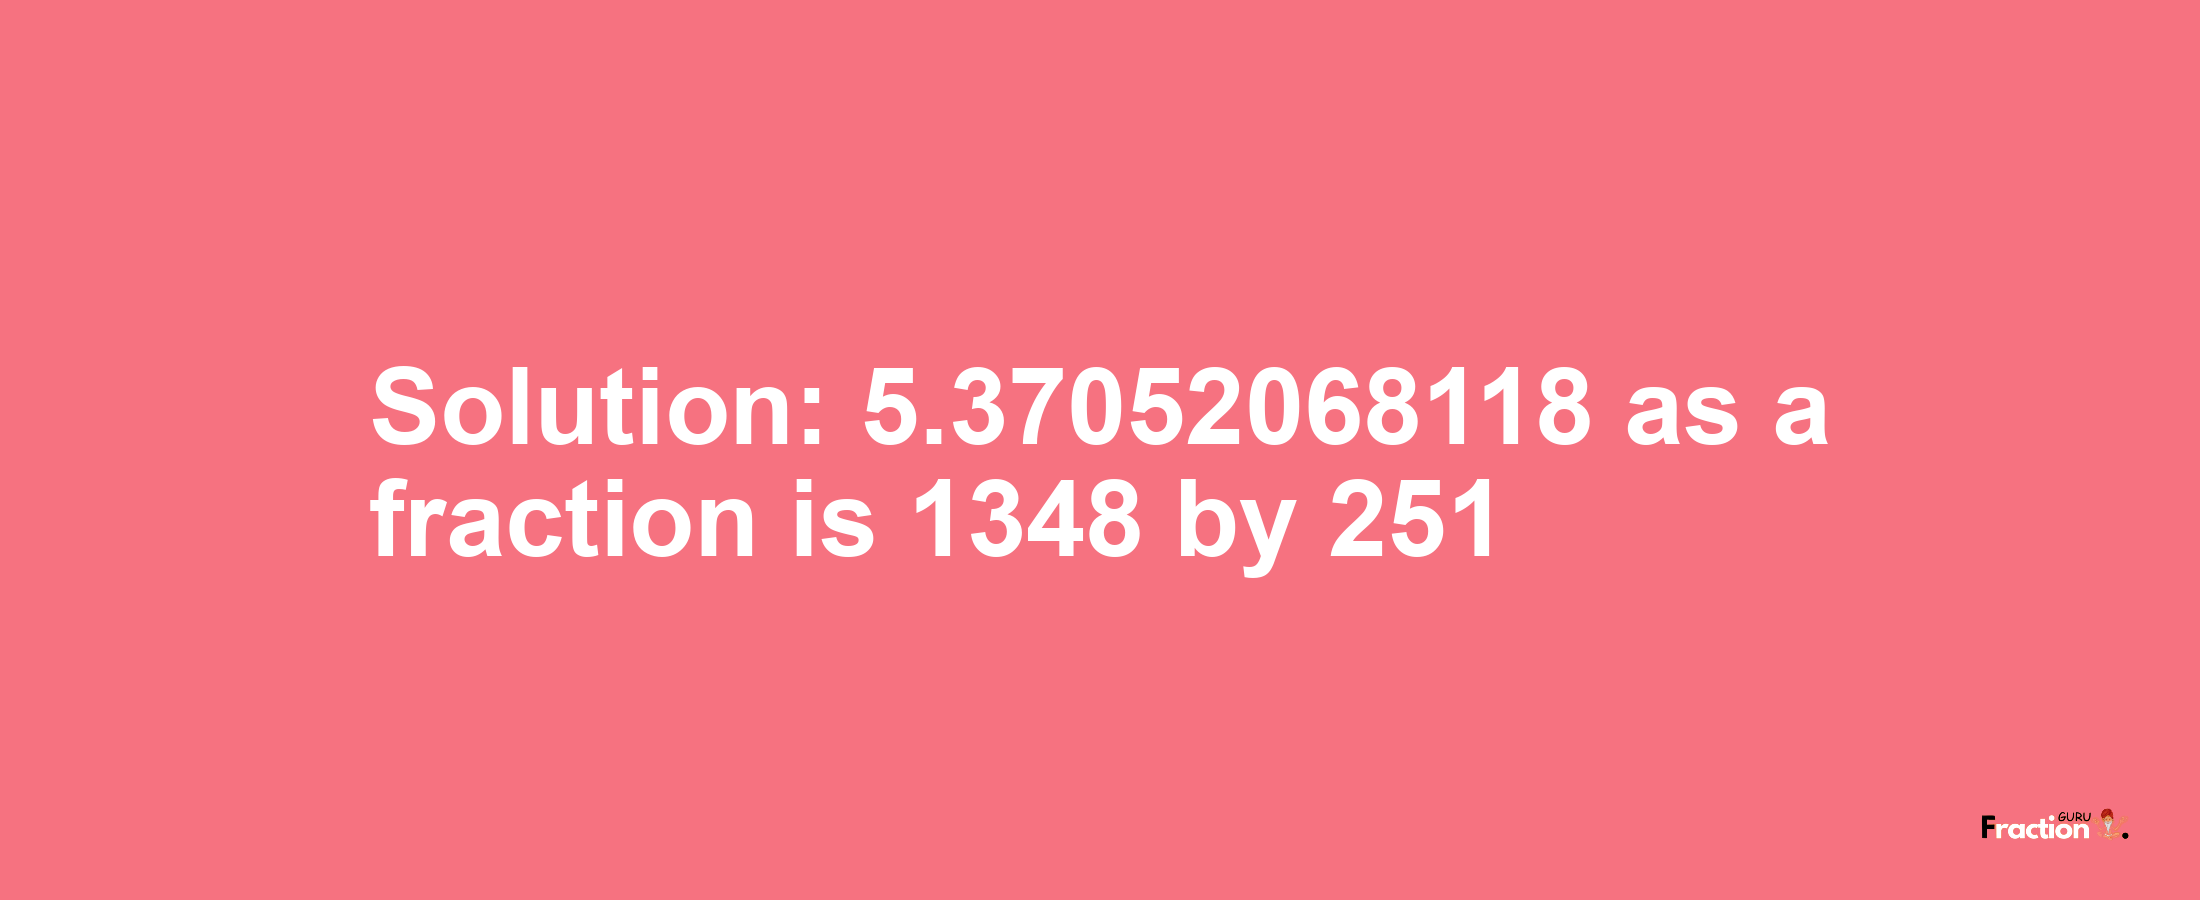 Solution:5.37052068118 as a fraction is 1348/251